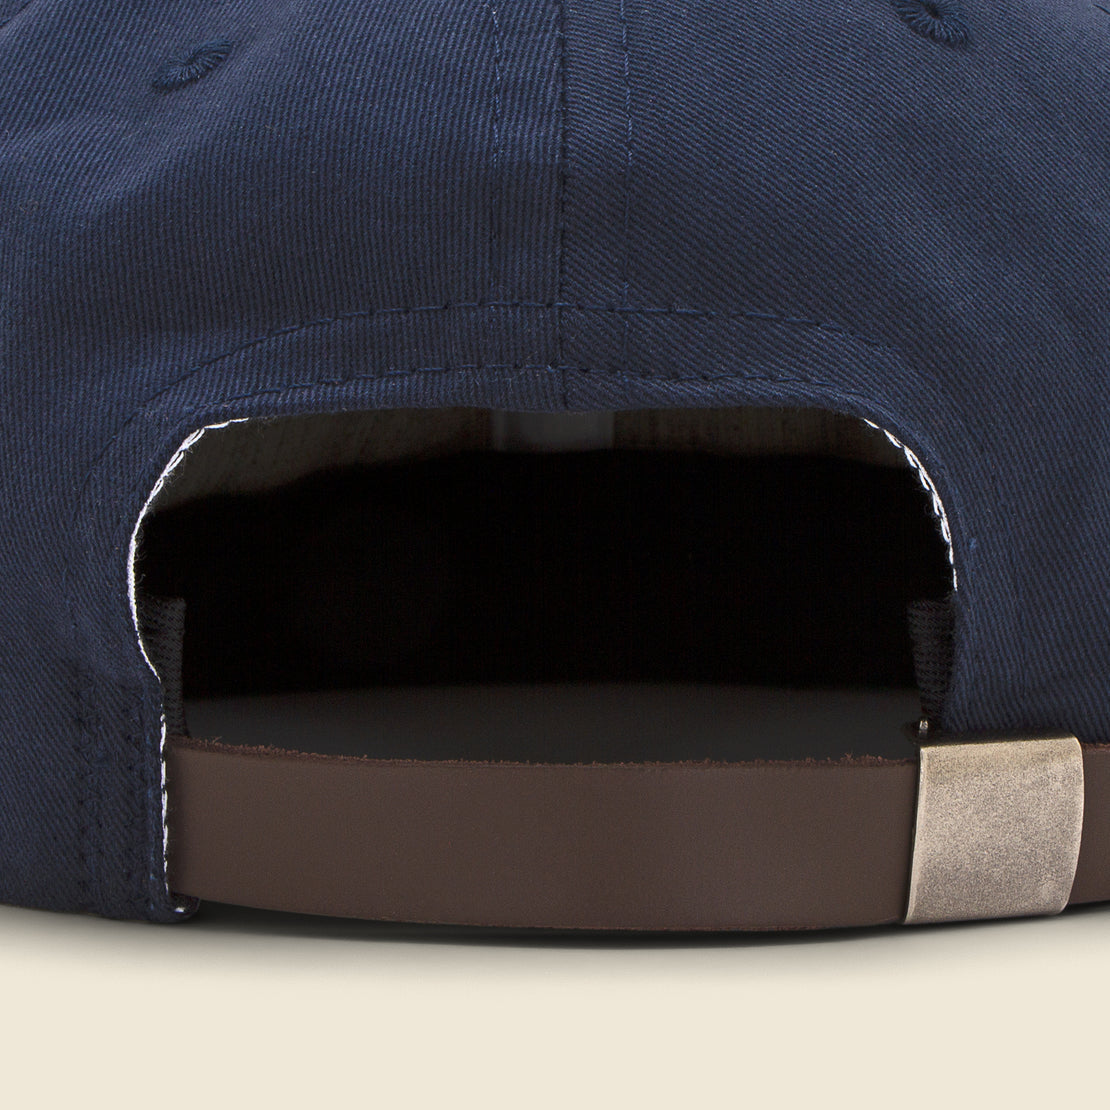 Los Angeles Cotton Hat - Navy - Ebbets Field Flannels - STAG Provisions - Accessories - Hats